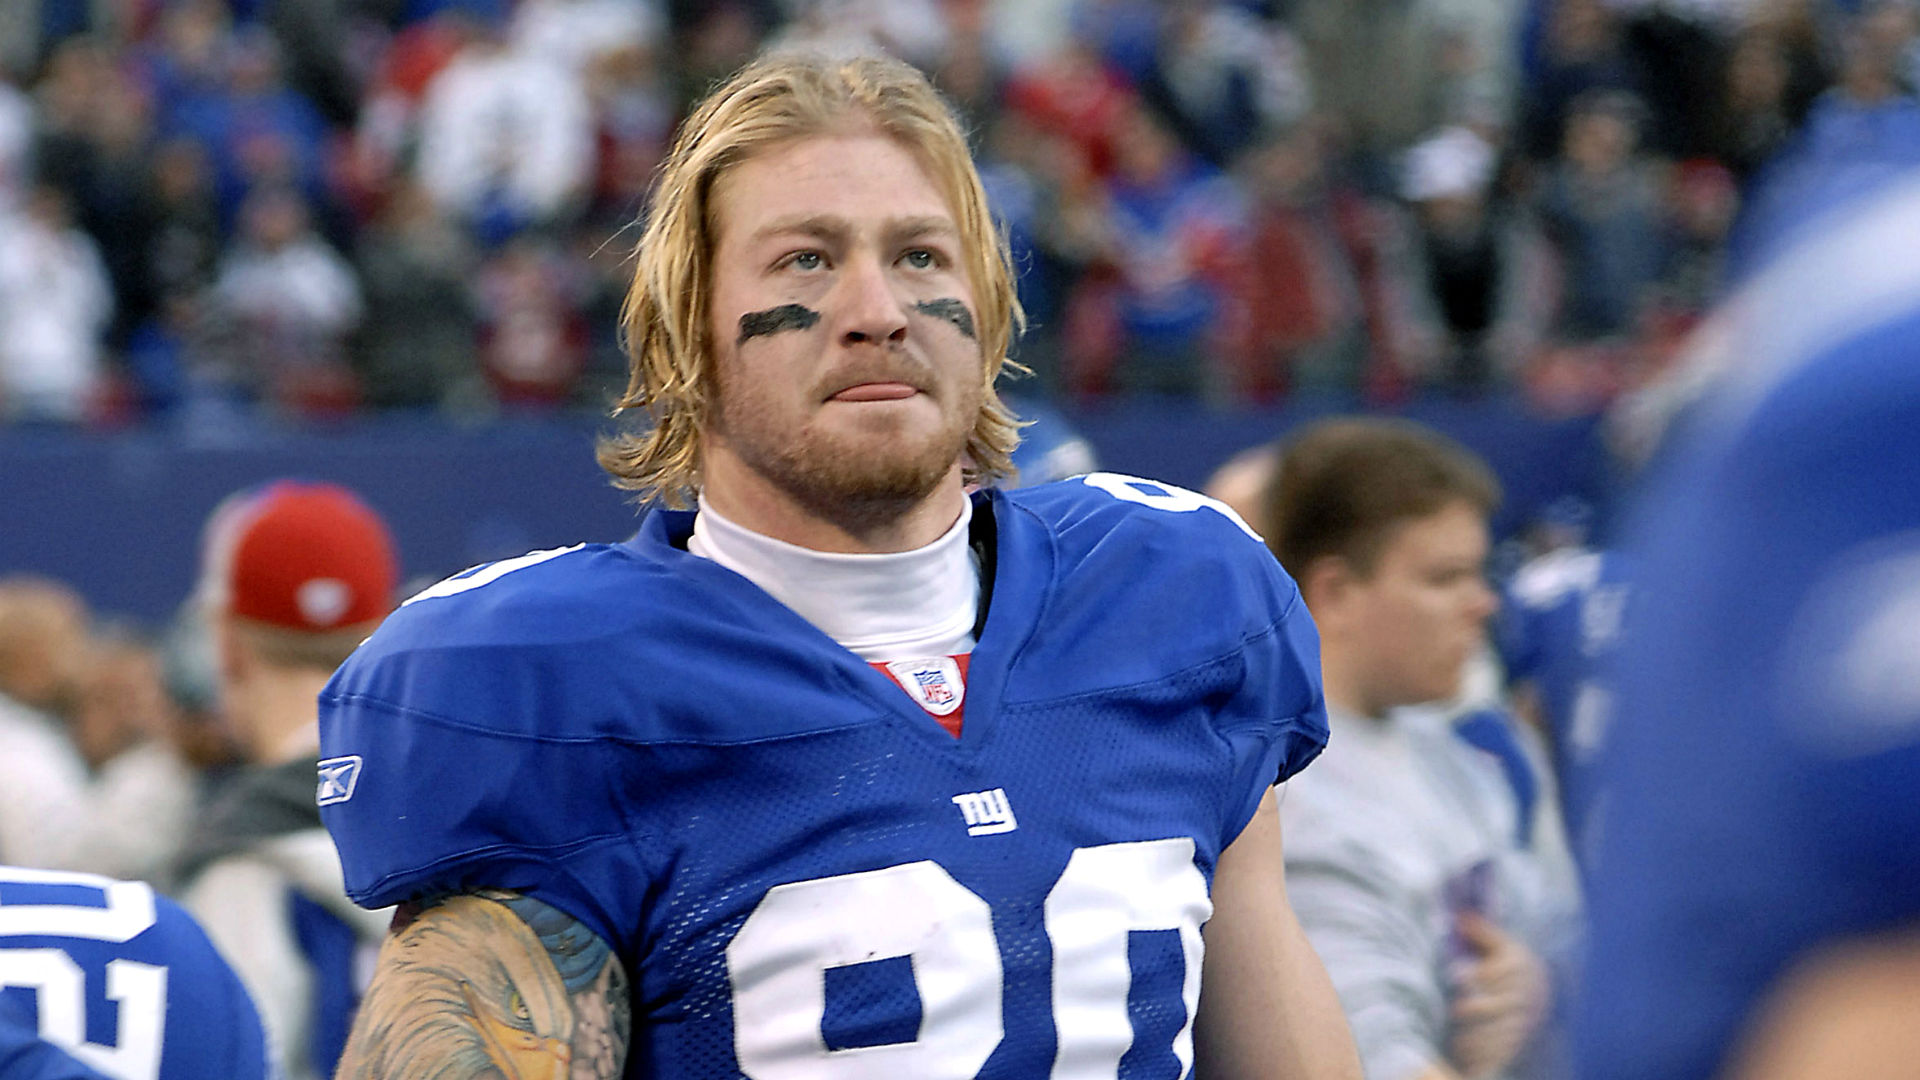 23-mind-blowing-facts-about-jeremy-shockey